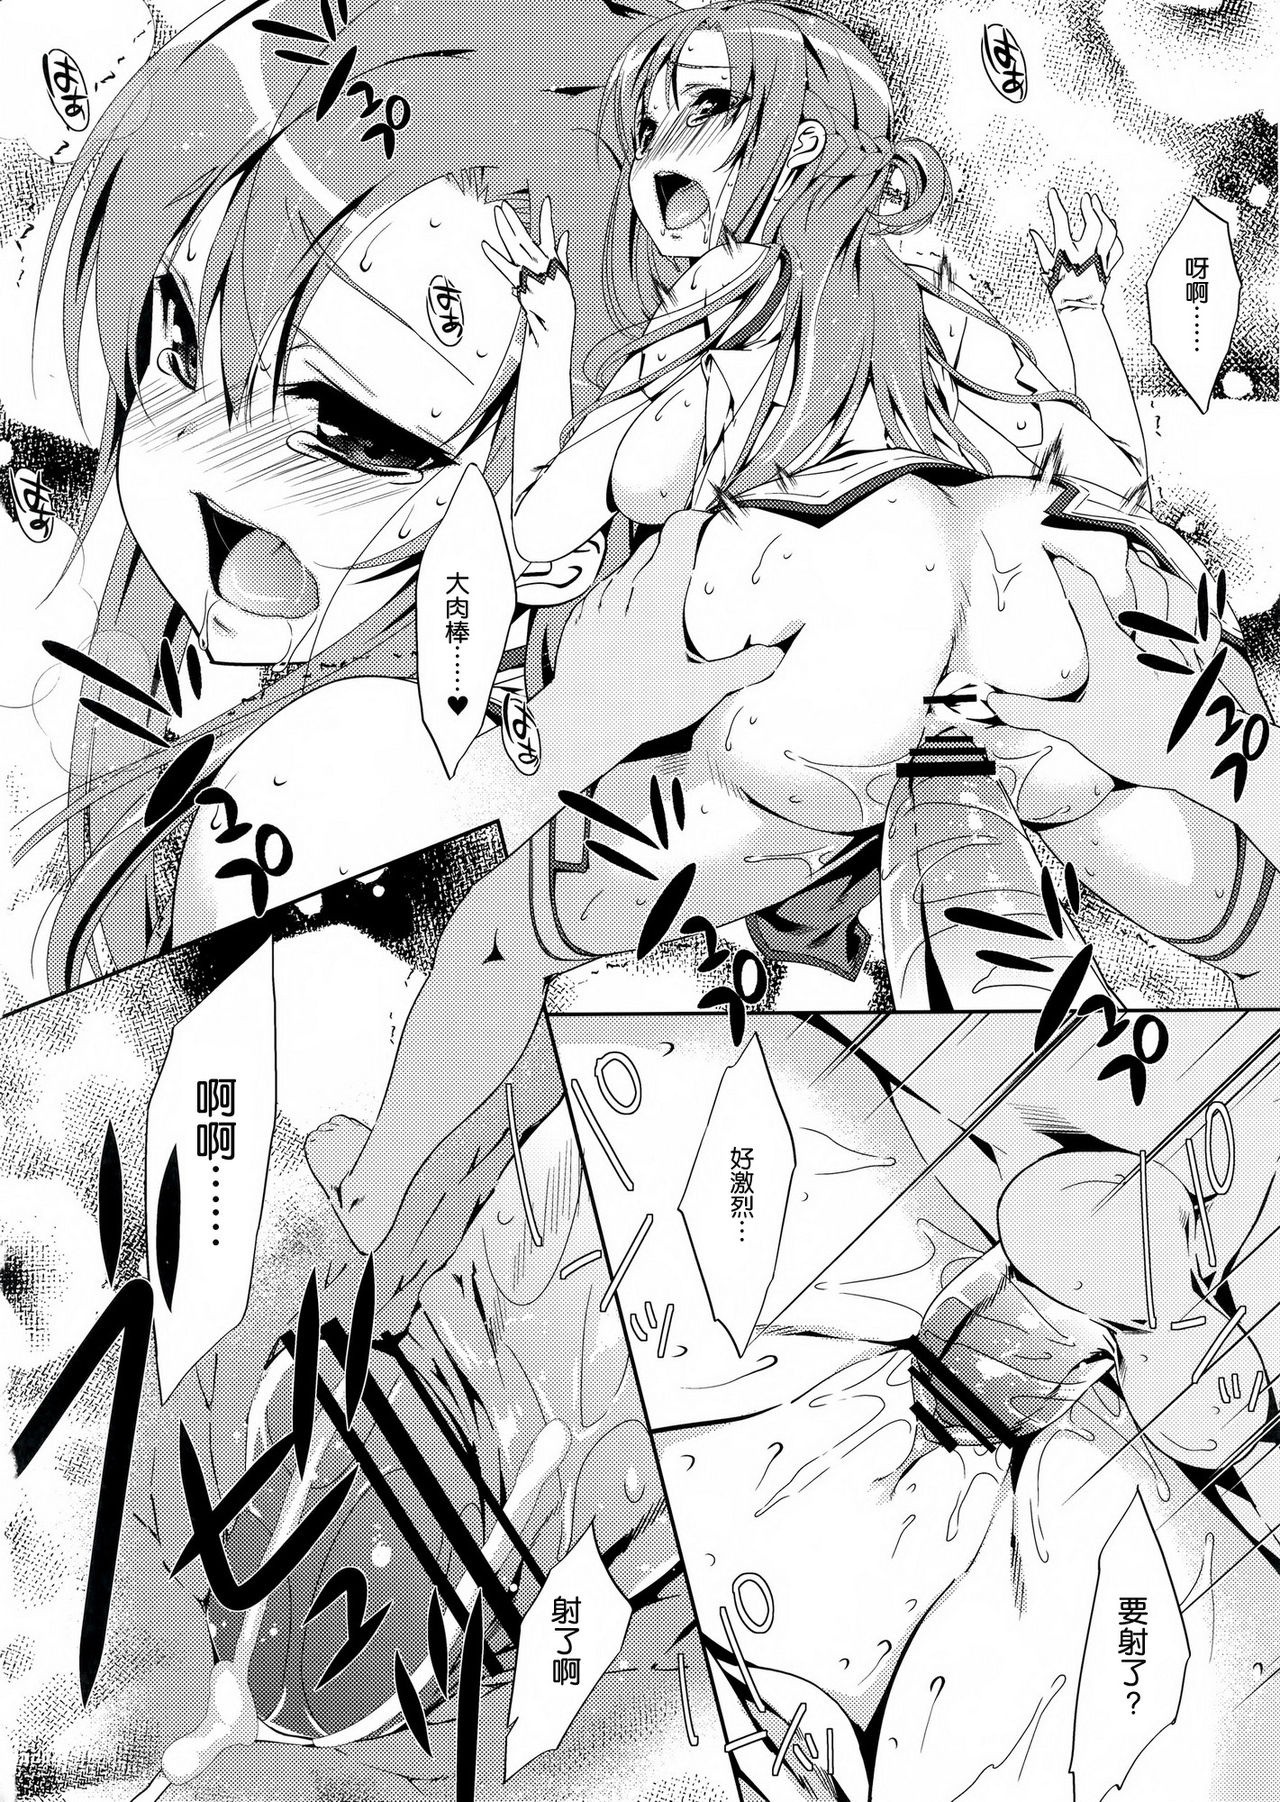 SPECIAL ASUNA ONLINE 2 hentai manga picture 7